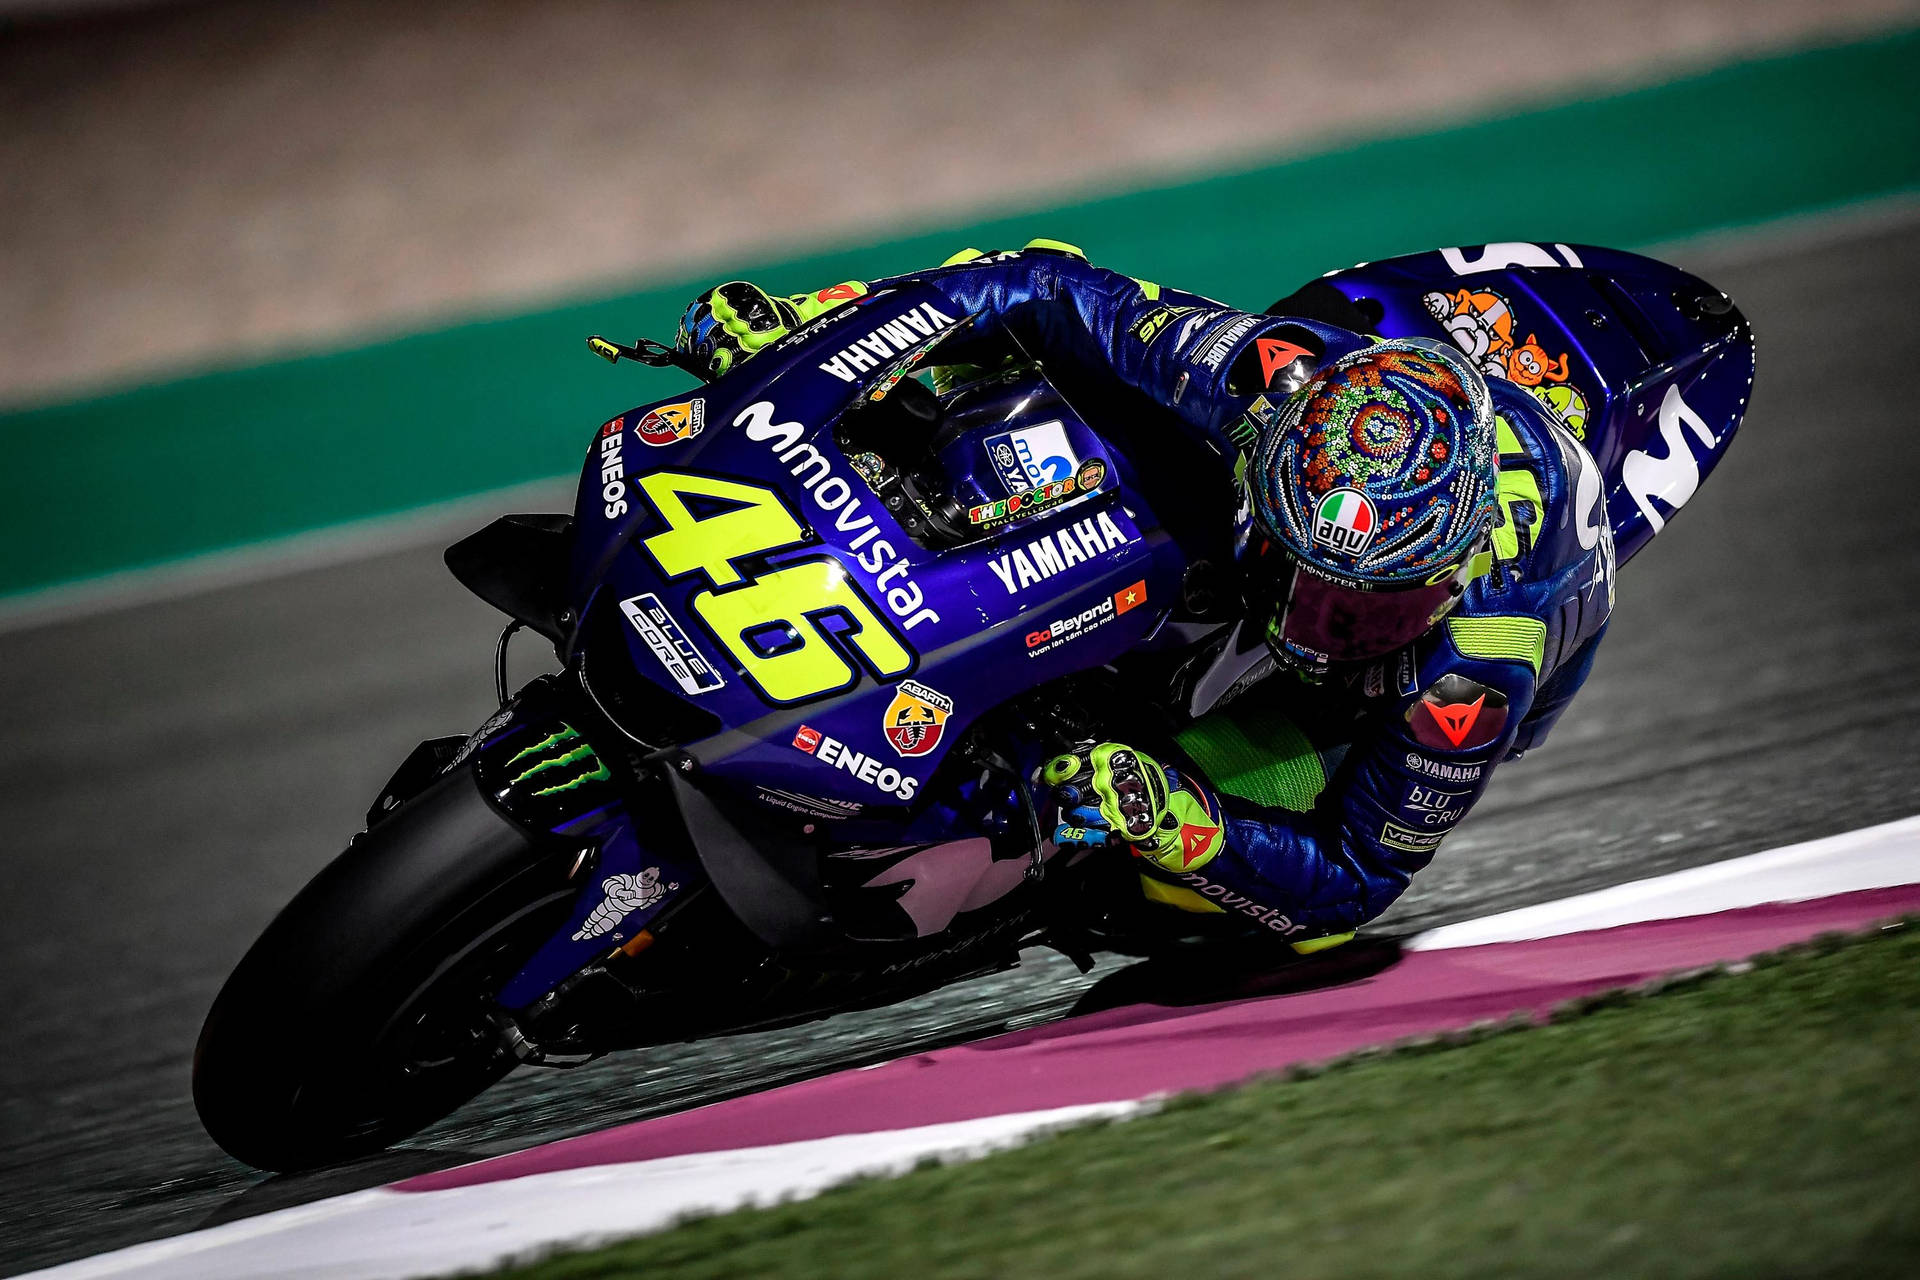 Vr 46 logo Wallpapers Download | MobCup